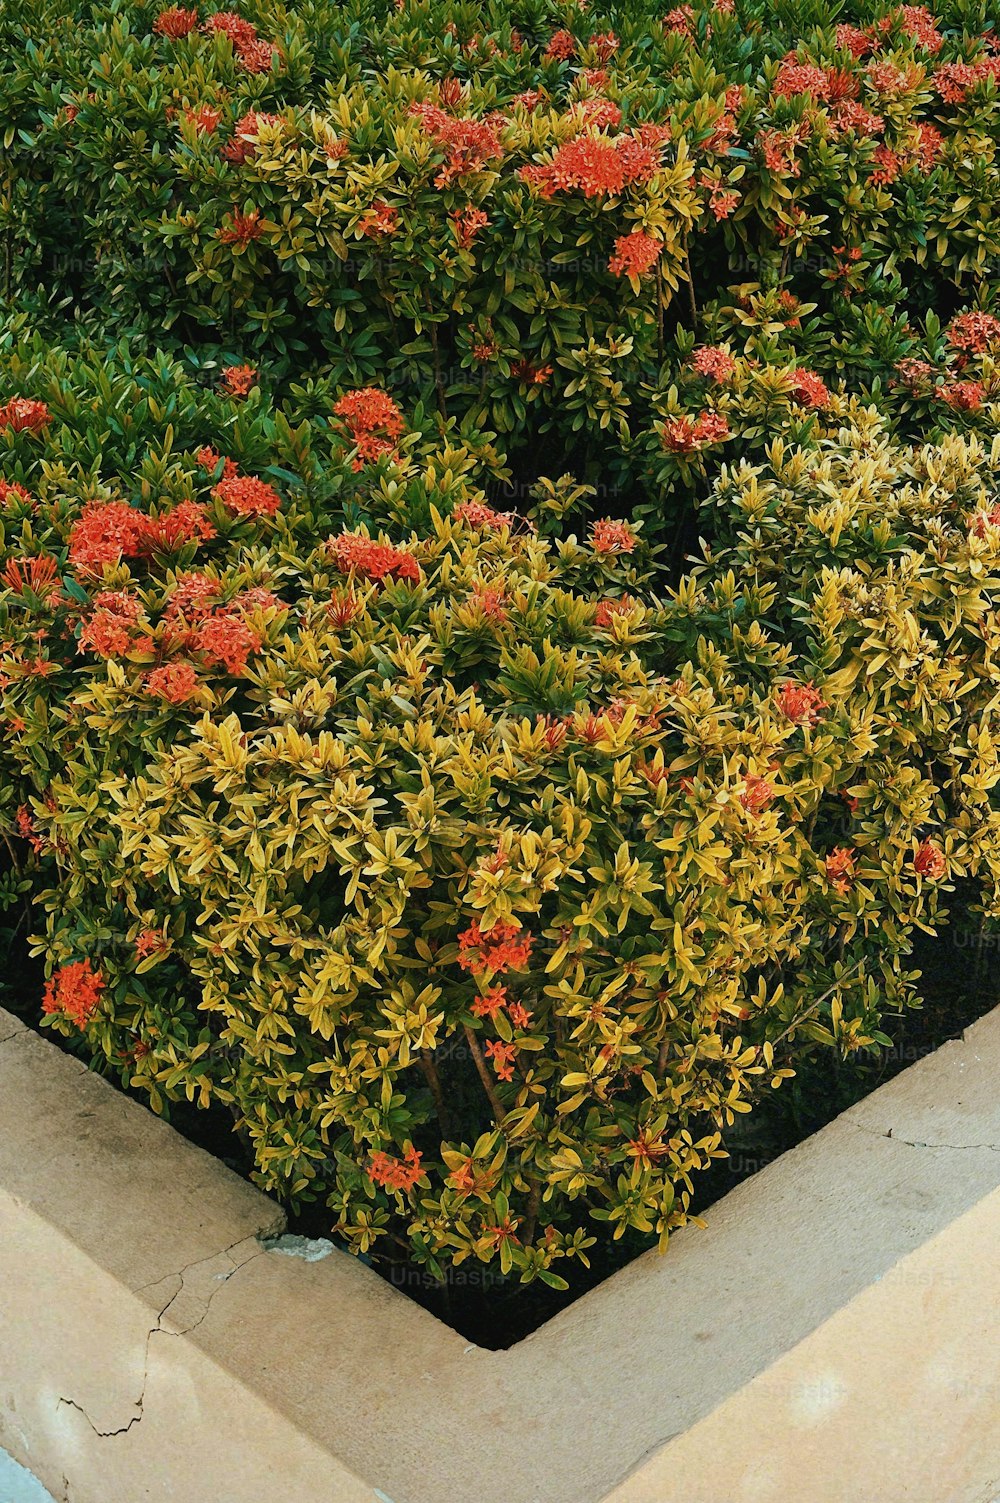 a close up of a bush with red flowers